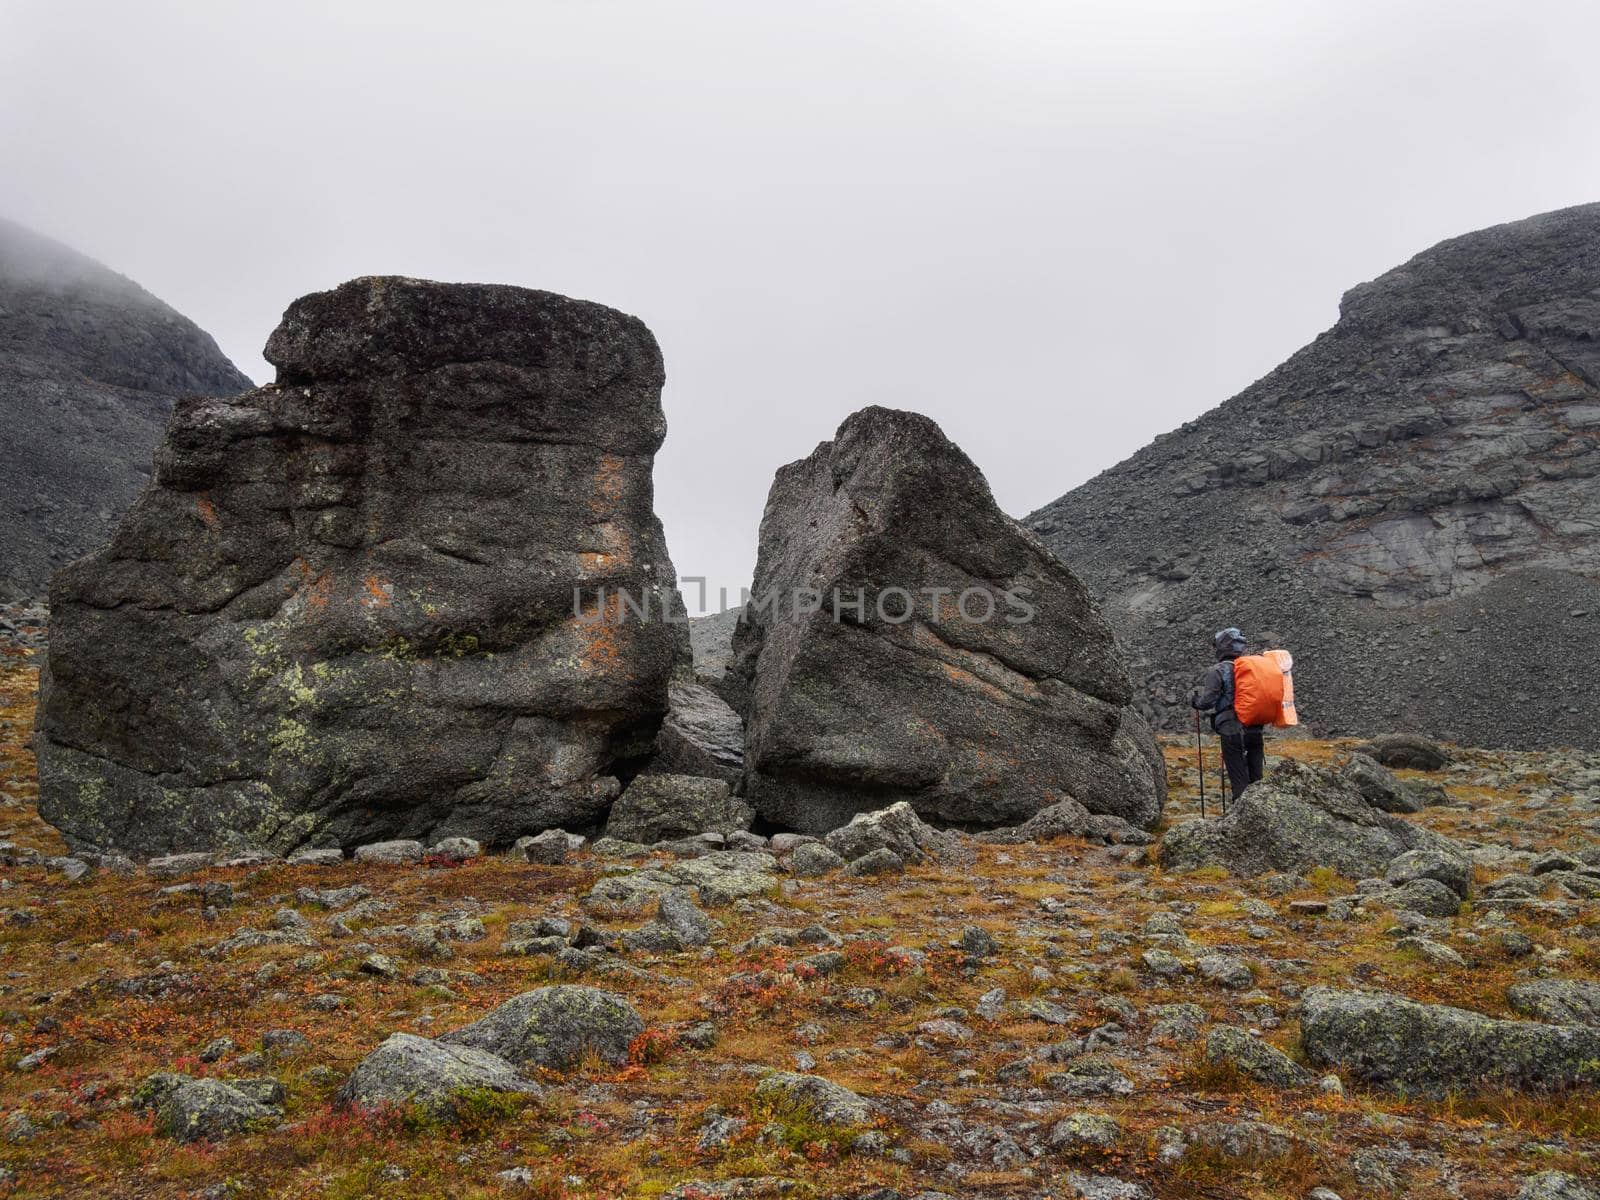 Hiker woman walking in a mountain rocky path by Andre1ns